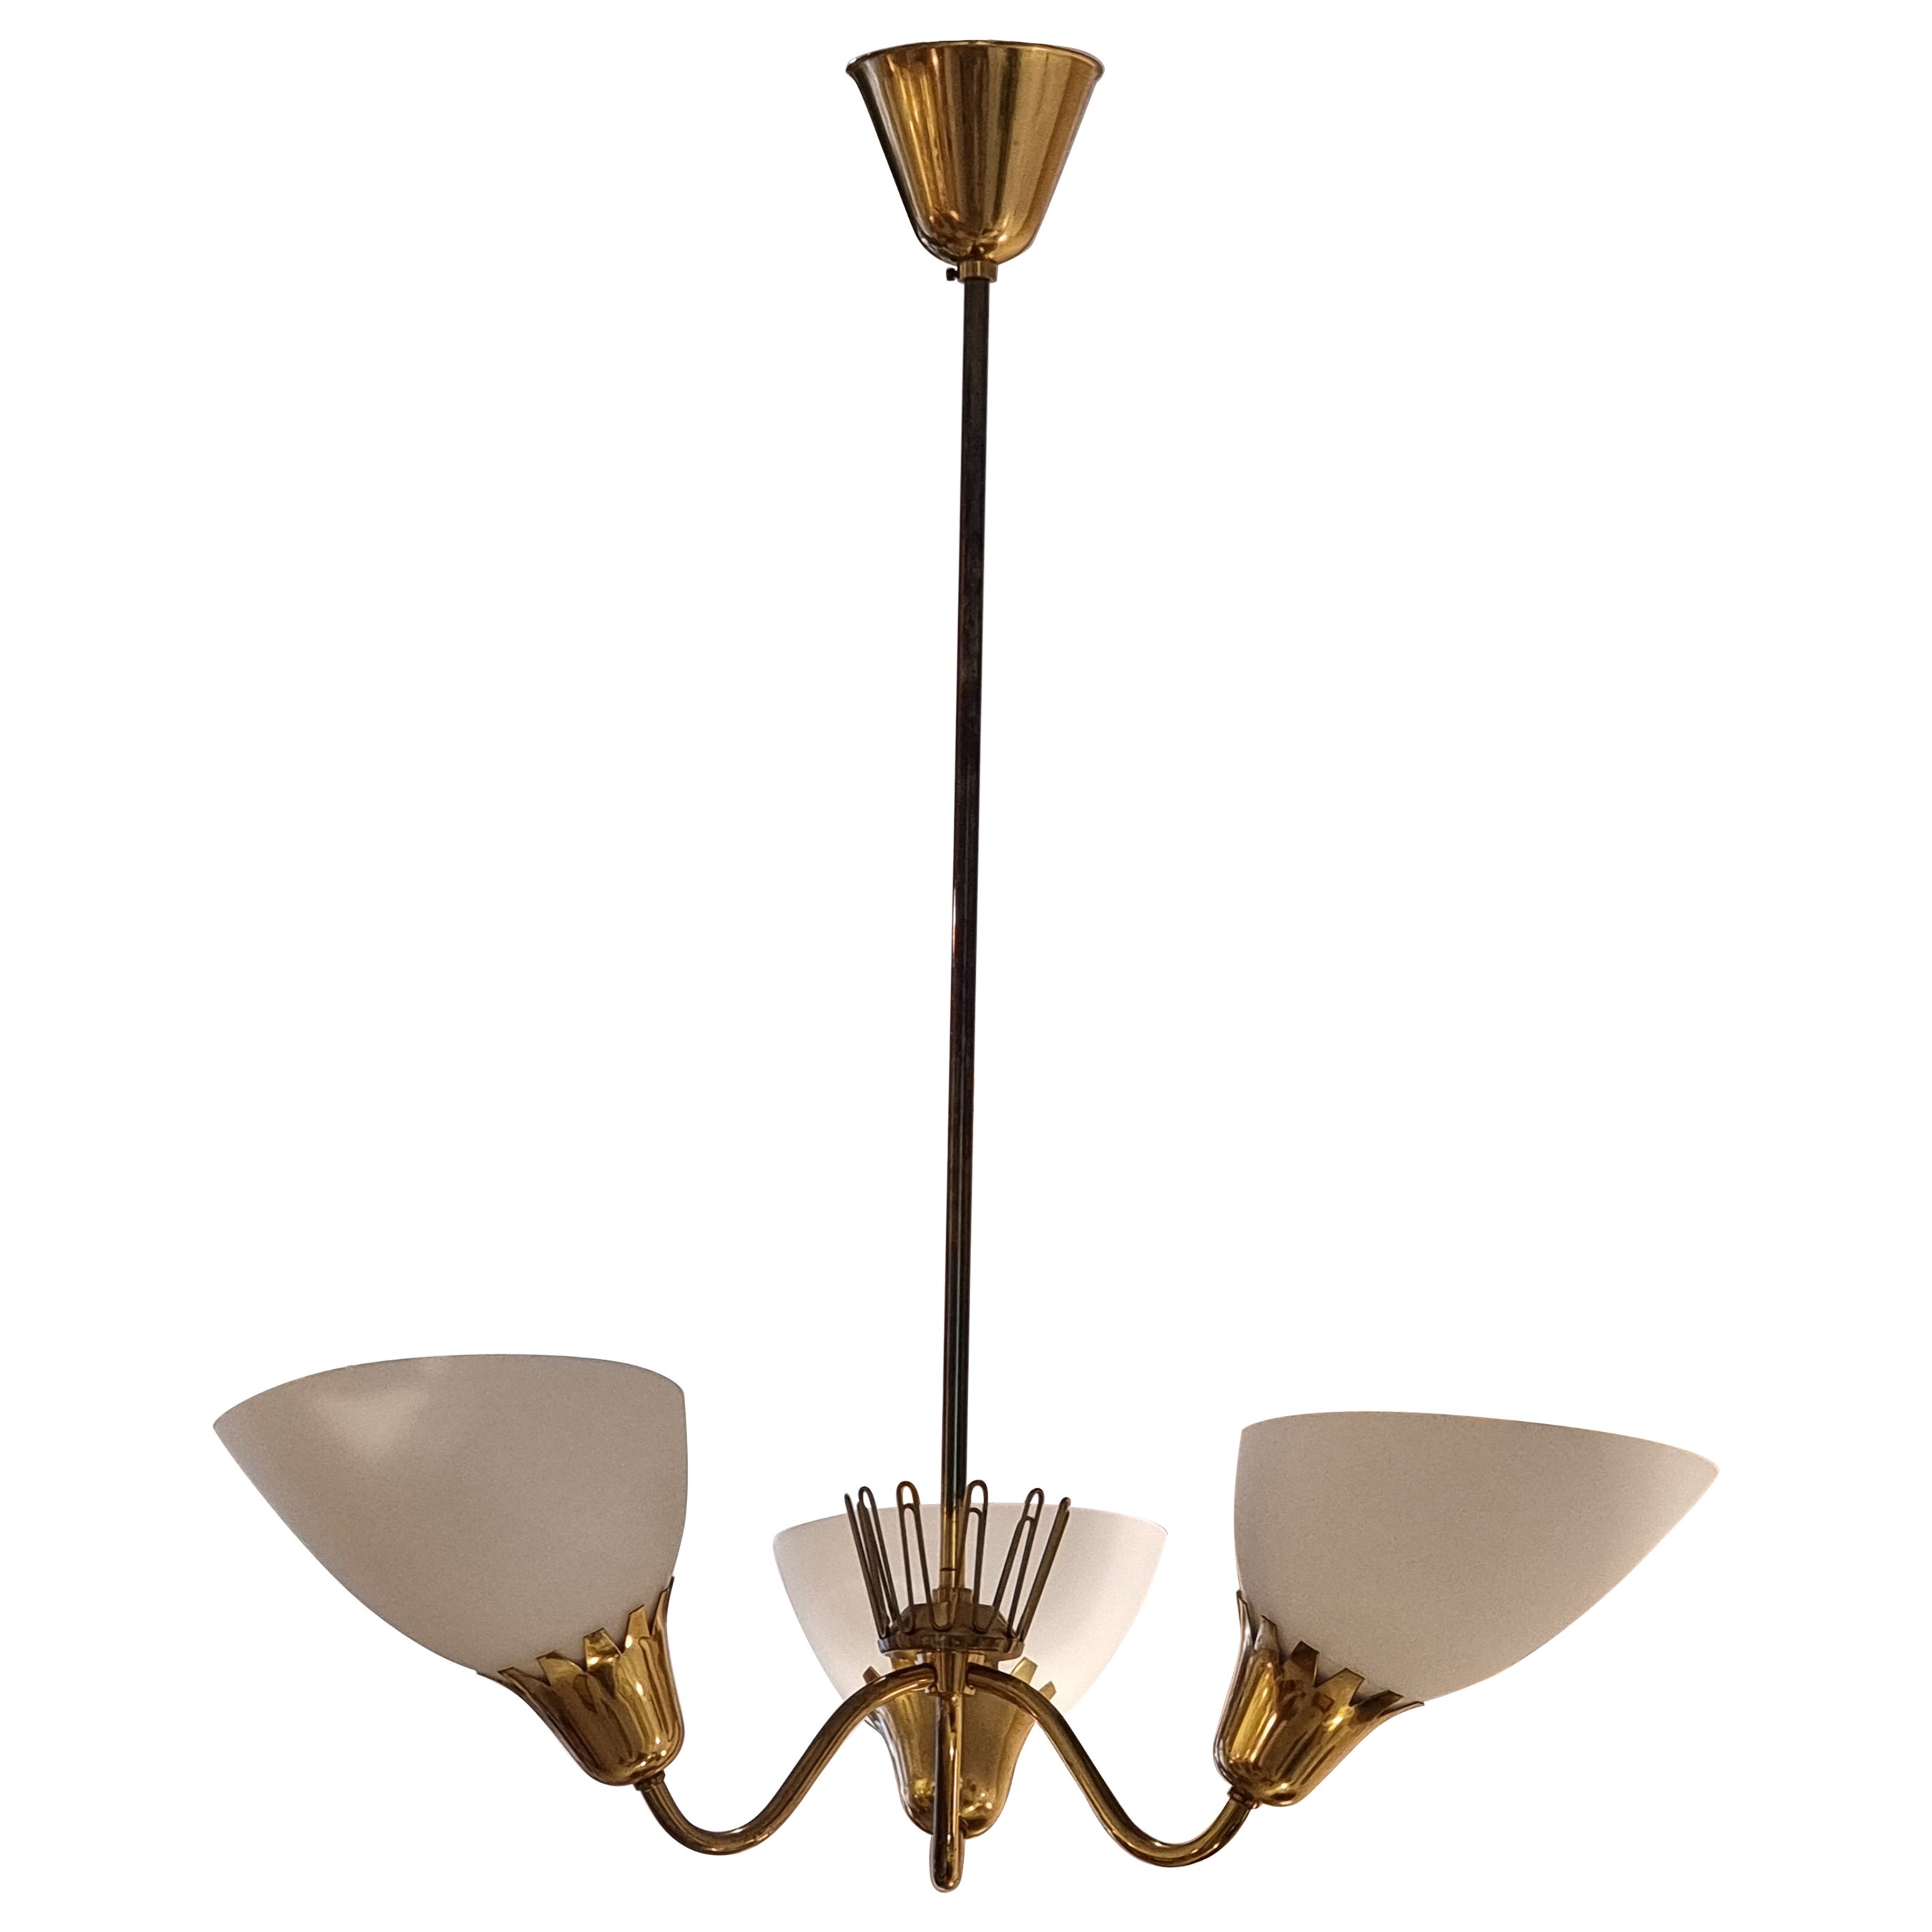 ASEA pendant in brass with glass shades, Scandinavian Modern, Sweden mid-1900s. For Sale